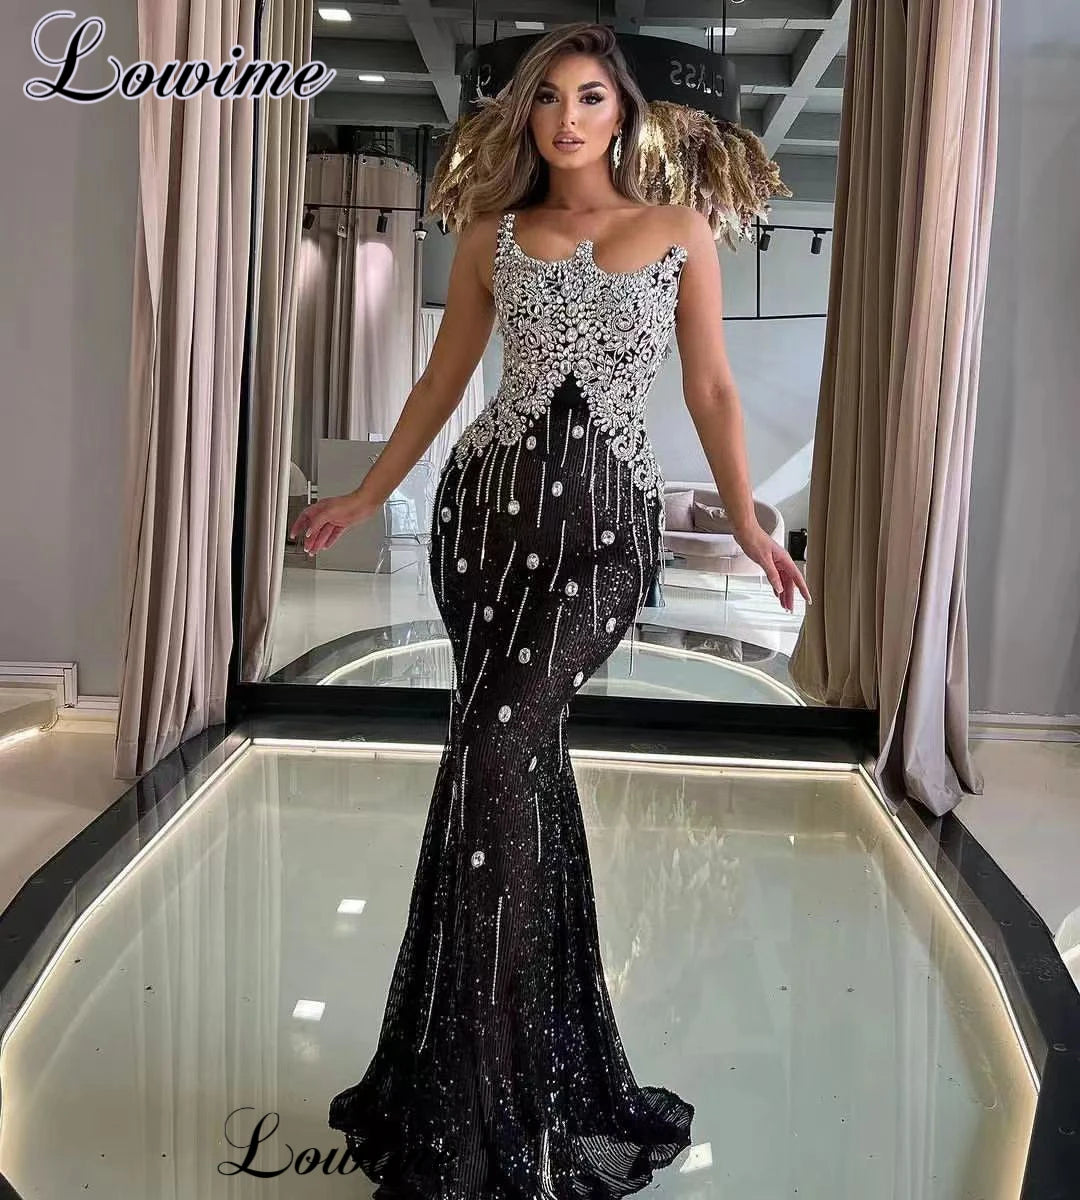 Black Sequined Prom Dresses With Crystals Sleeveless Mermaid Cocktail Dresses Vestidos De Cóctel Wedding Party Dresses For Women